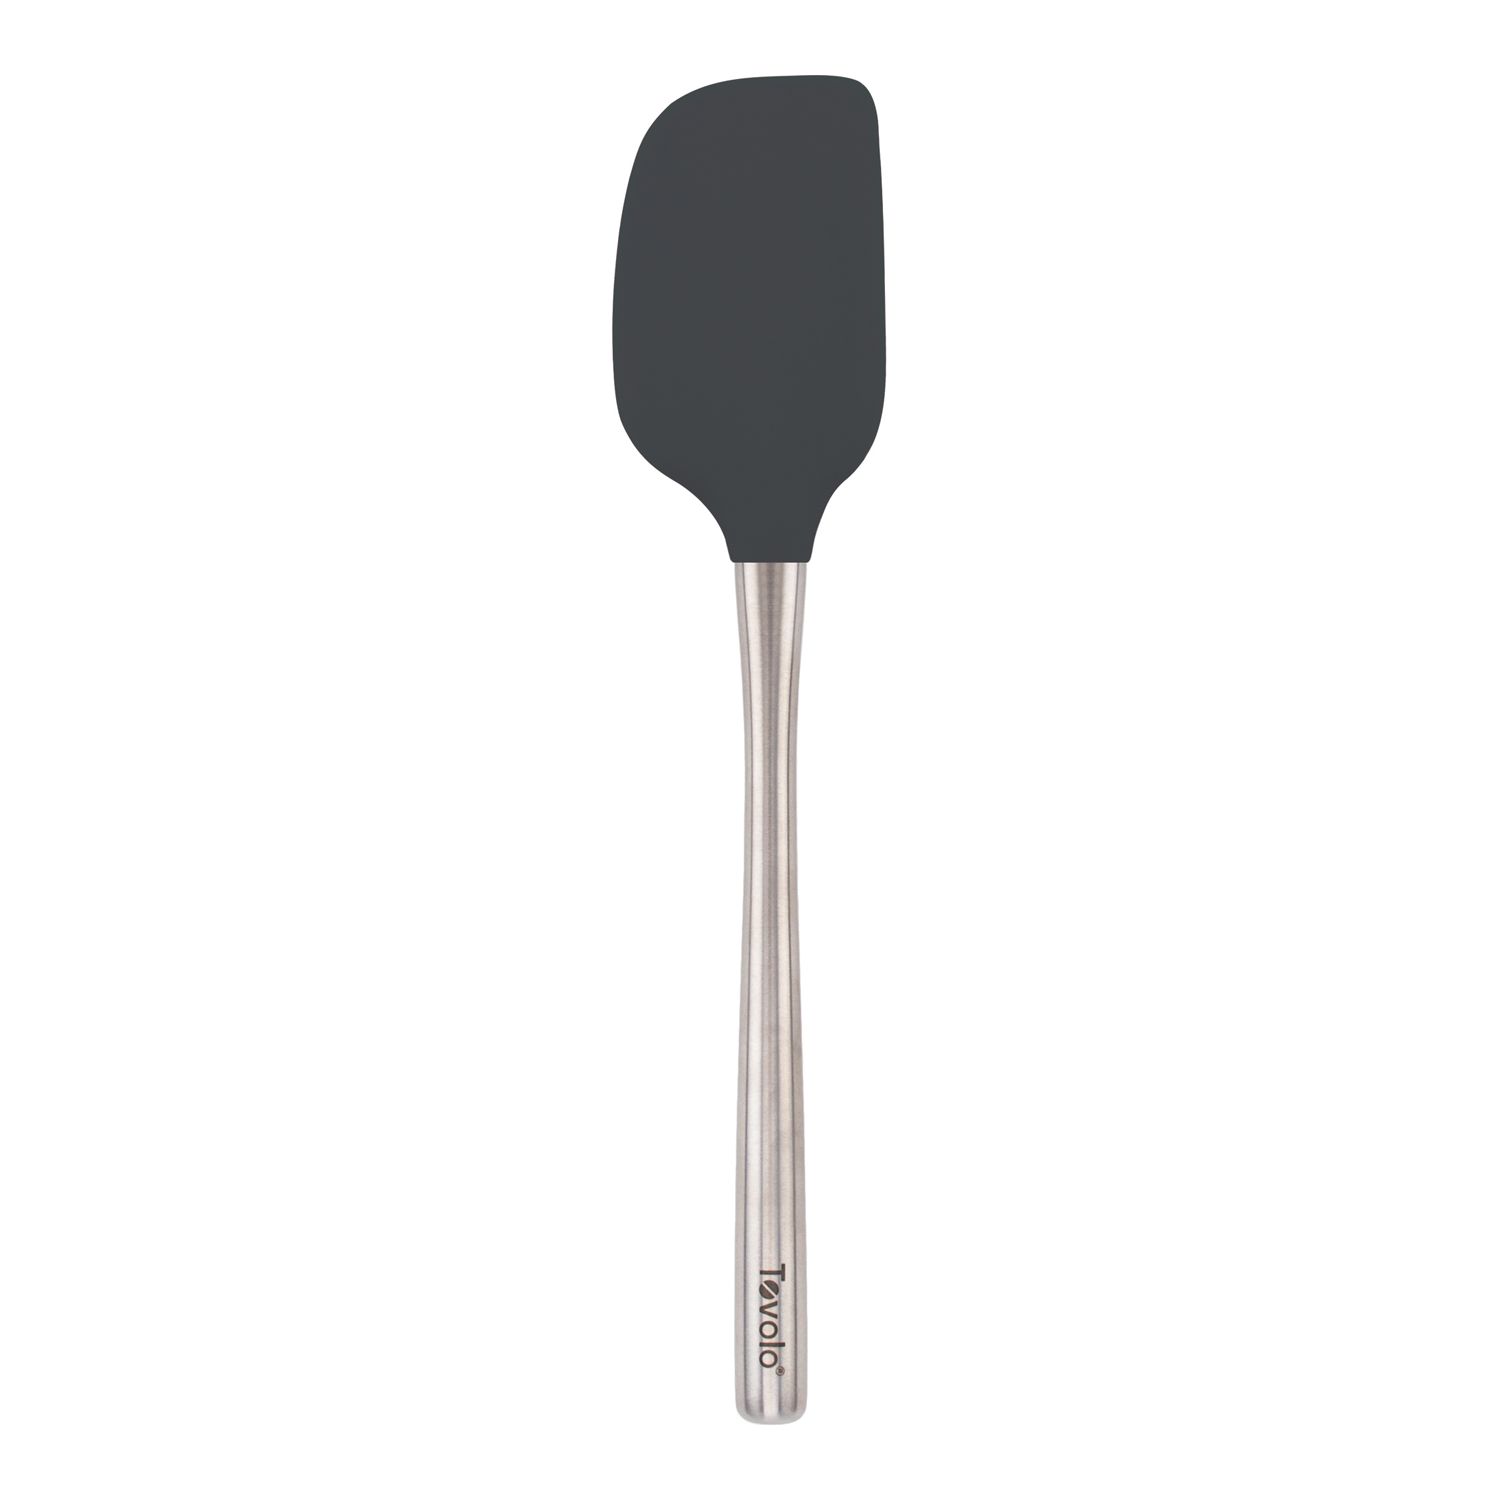 Tovolo Flex-Core Stainless Steel Spatula Set of 5